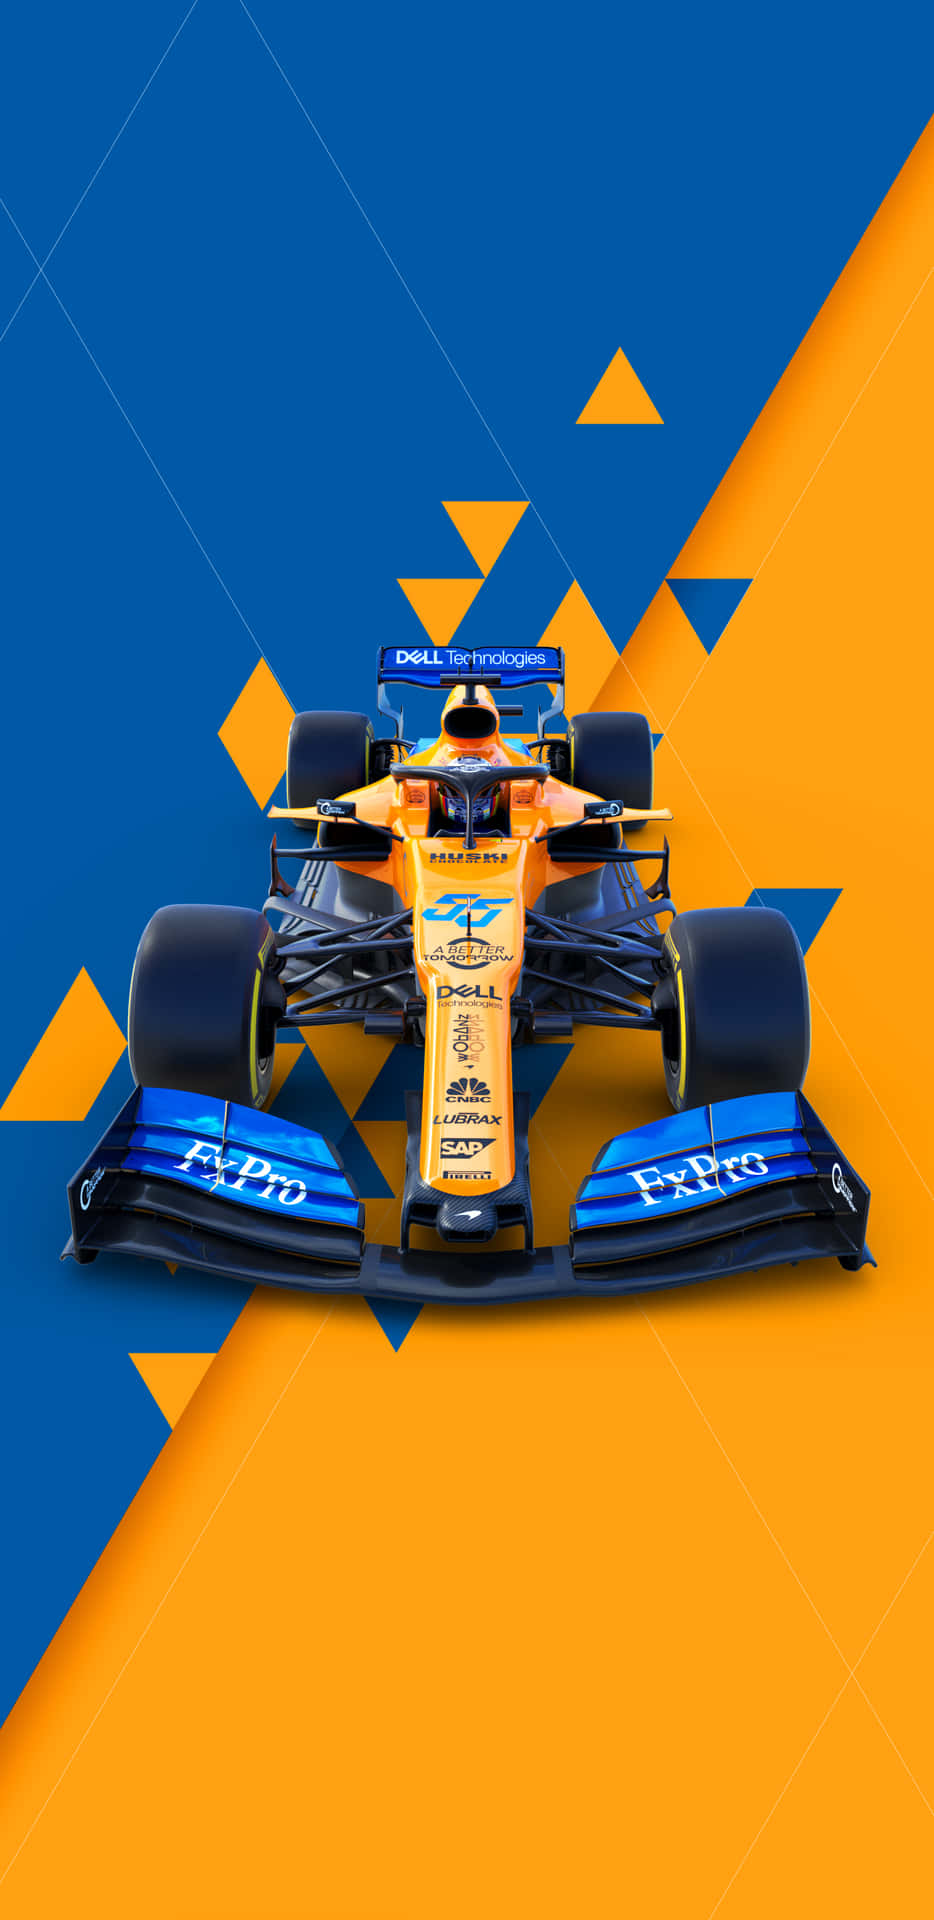 A Blue And Orange Racing Car On A Blue And Yellow Background